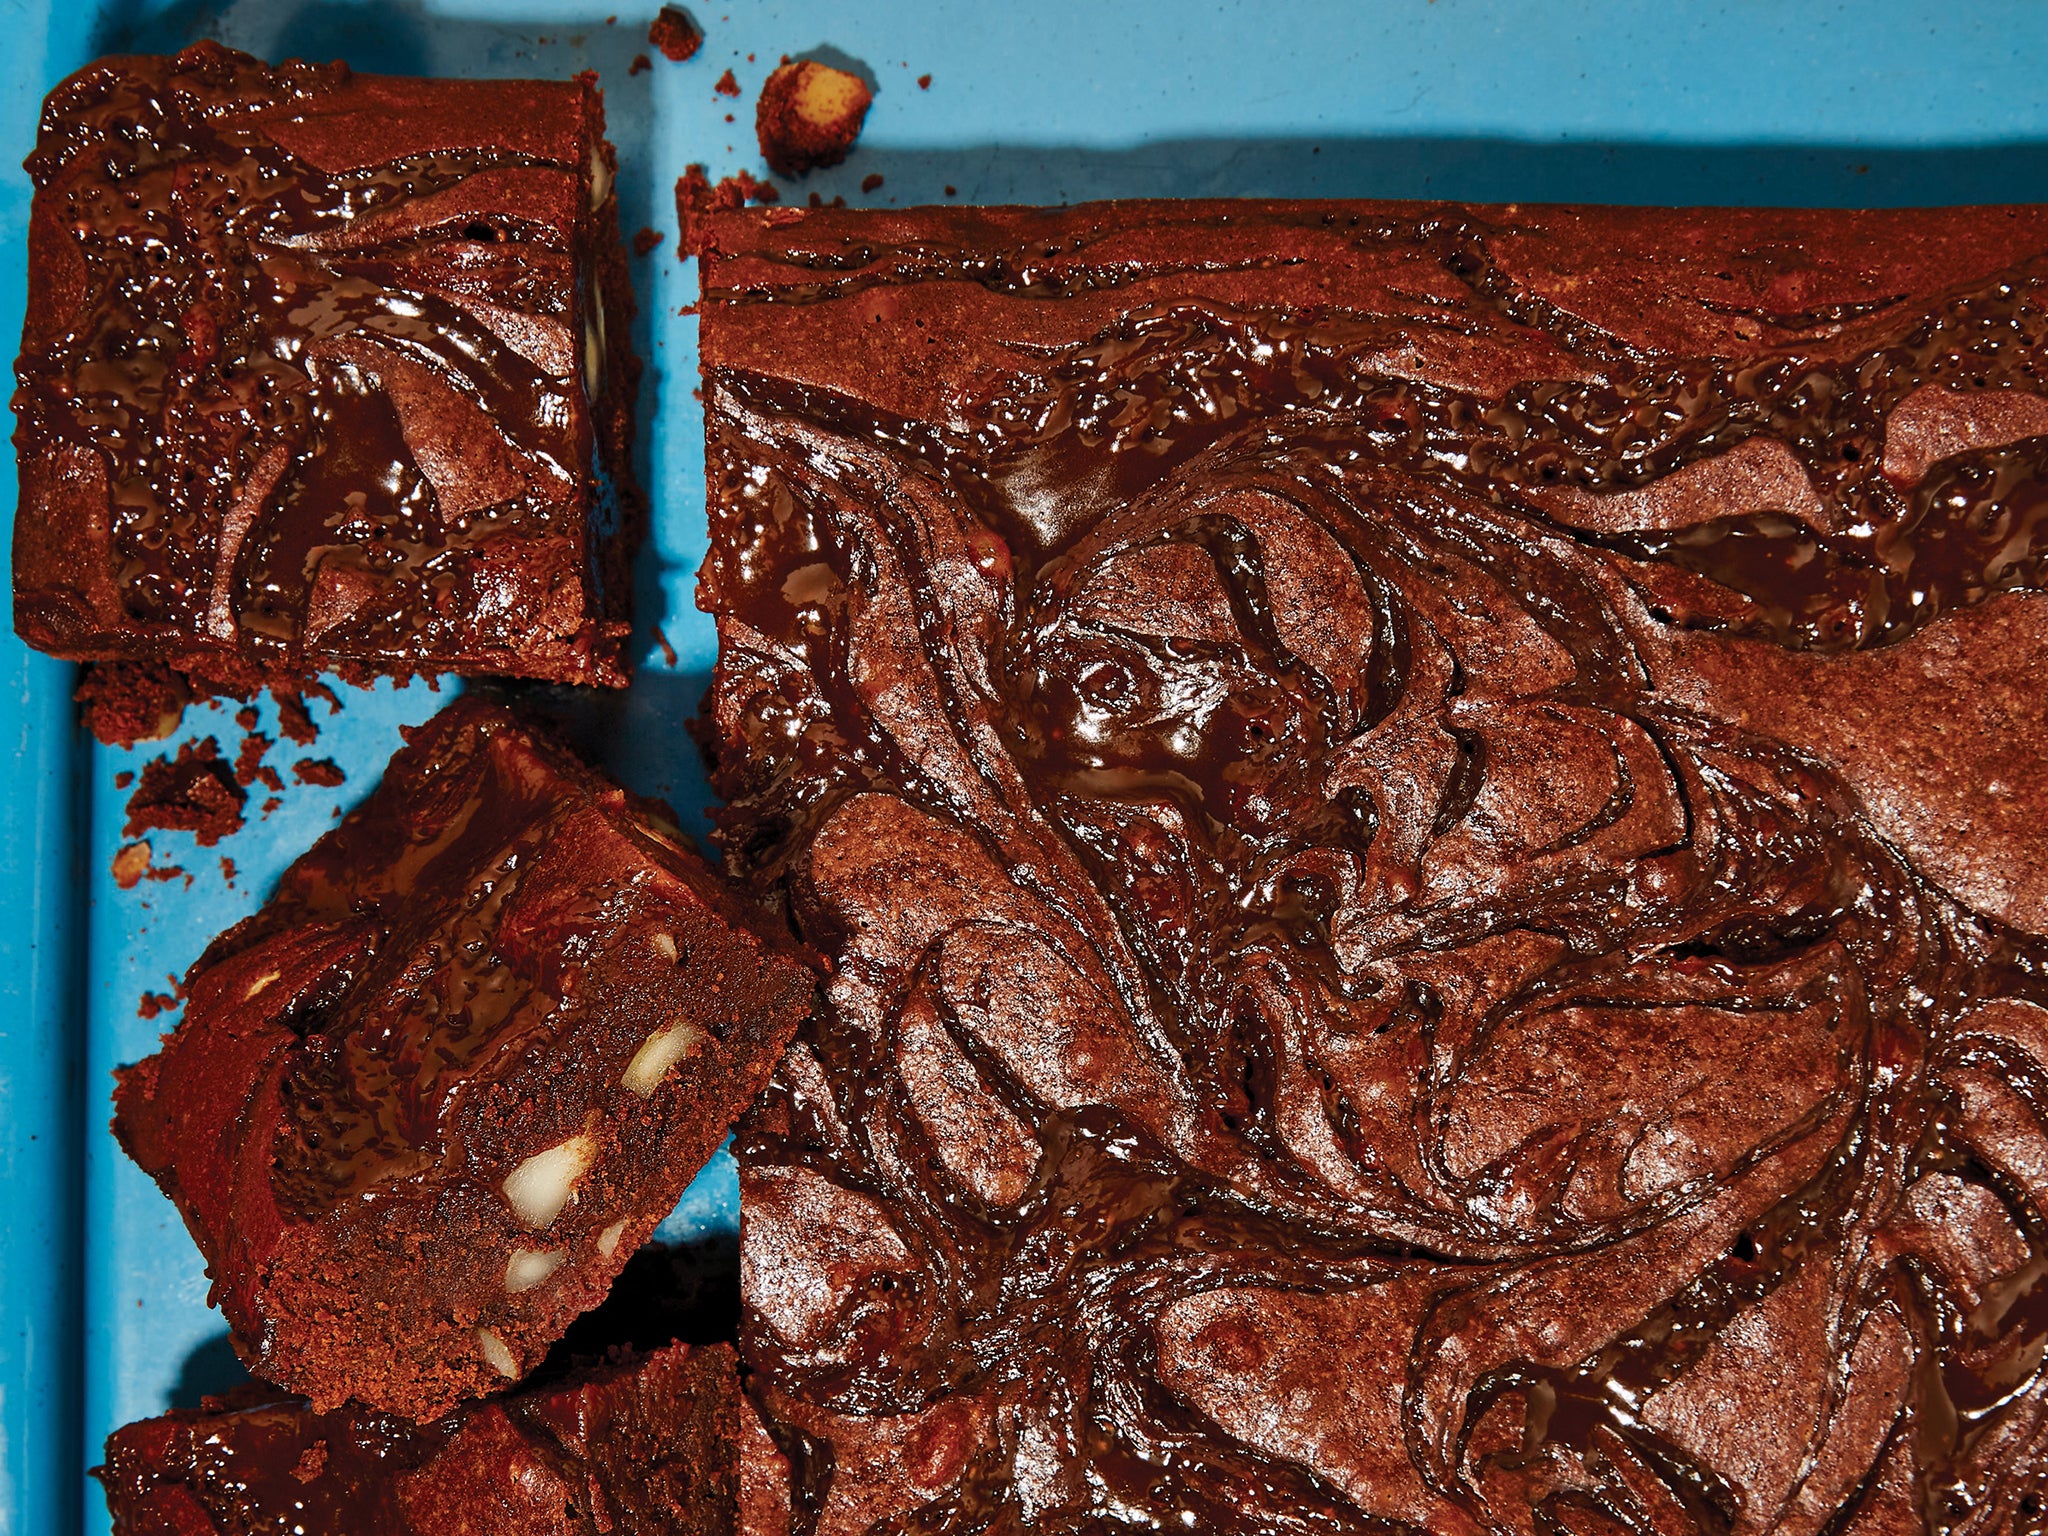 Sharp tamarind gives these brownies a sweetly sour profile